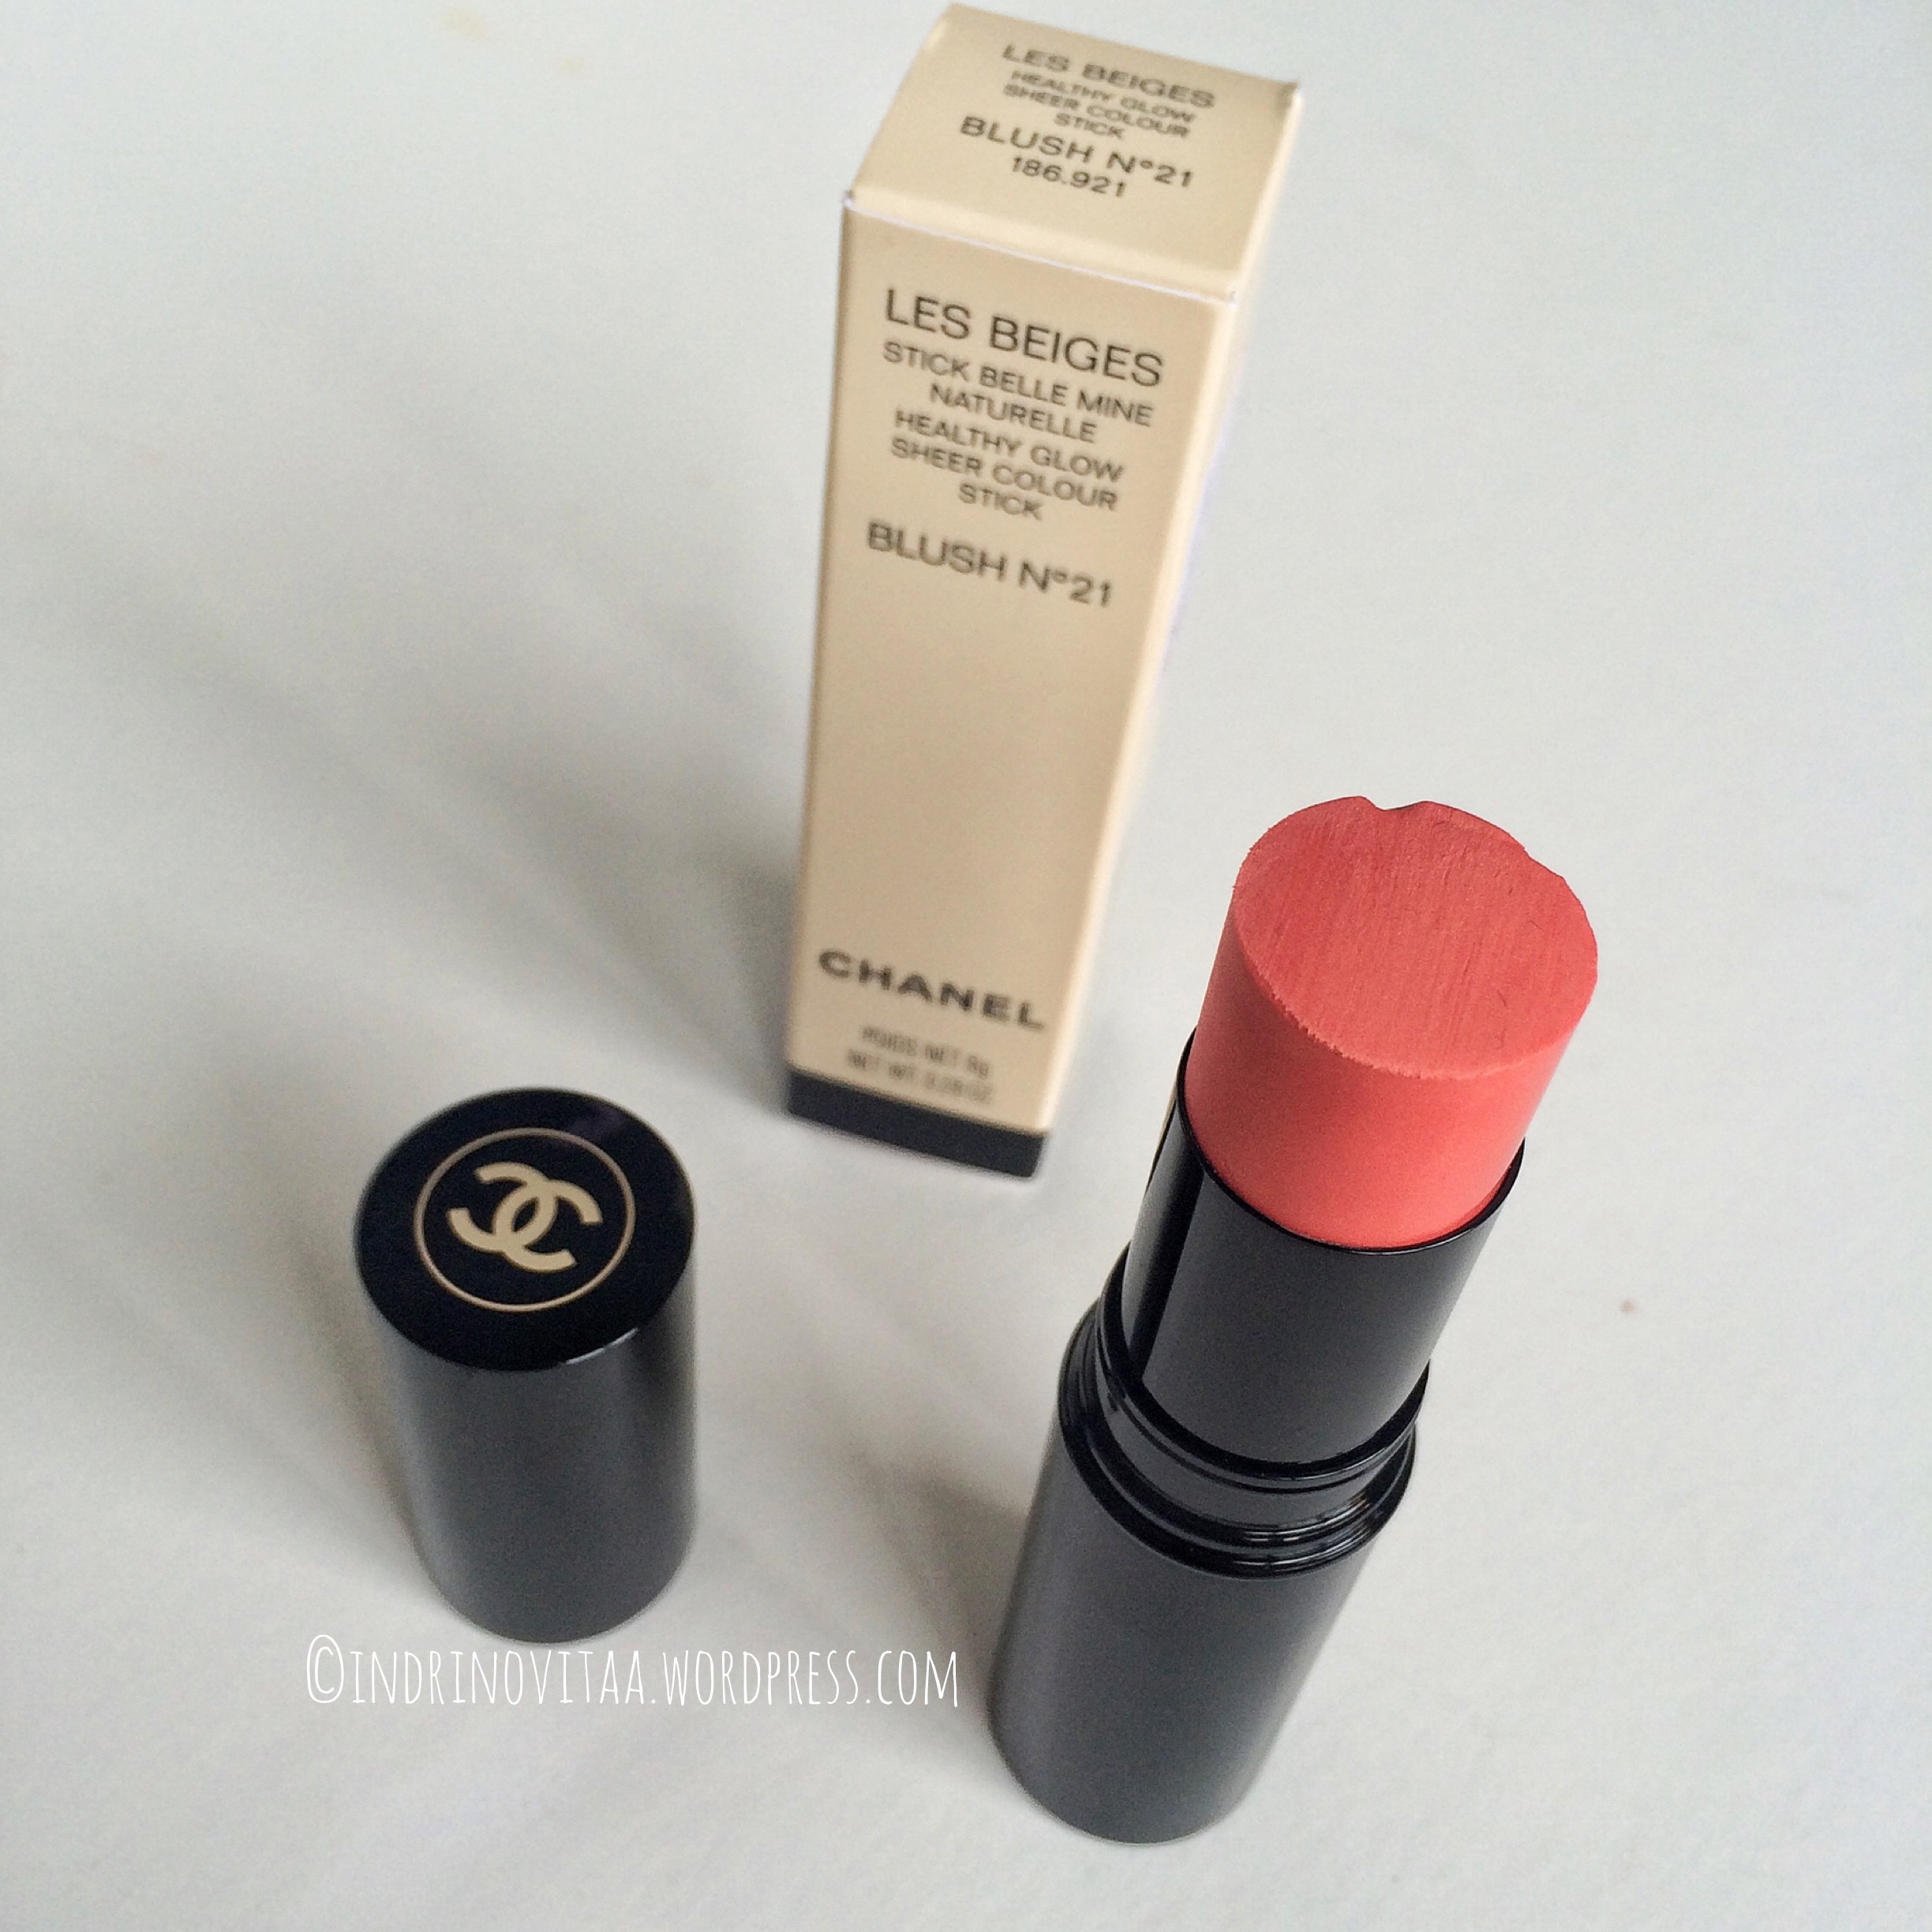 Les Beiges Healthy Glow Sheer Colour Stick Blush - 22 by Chanel